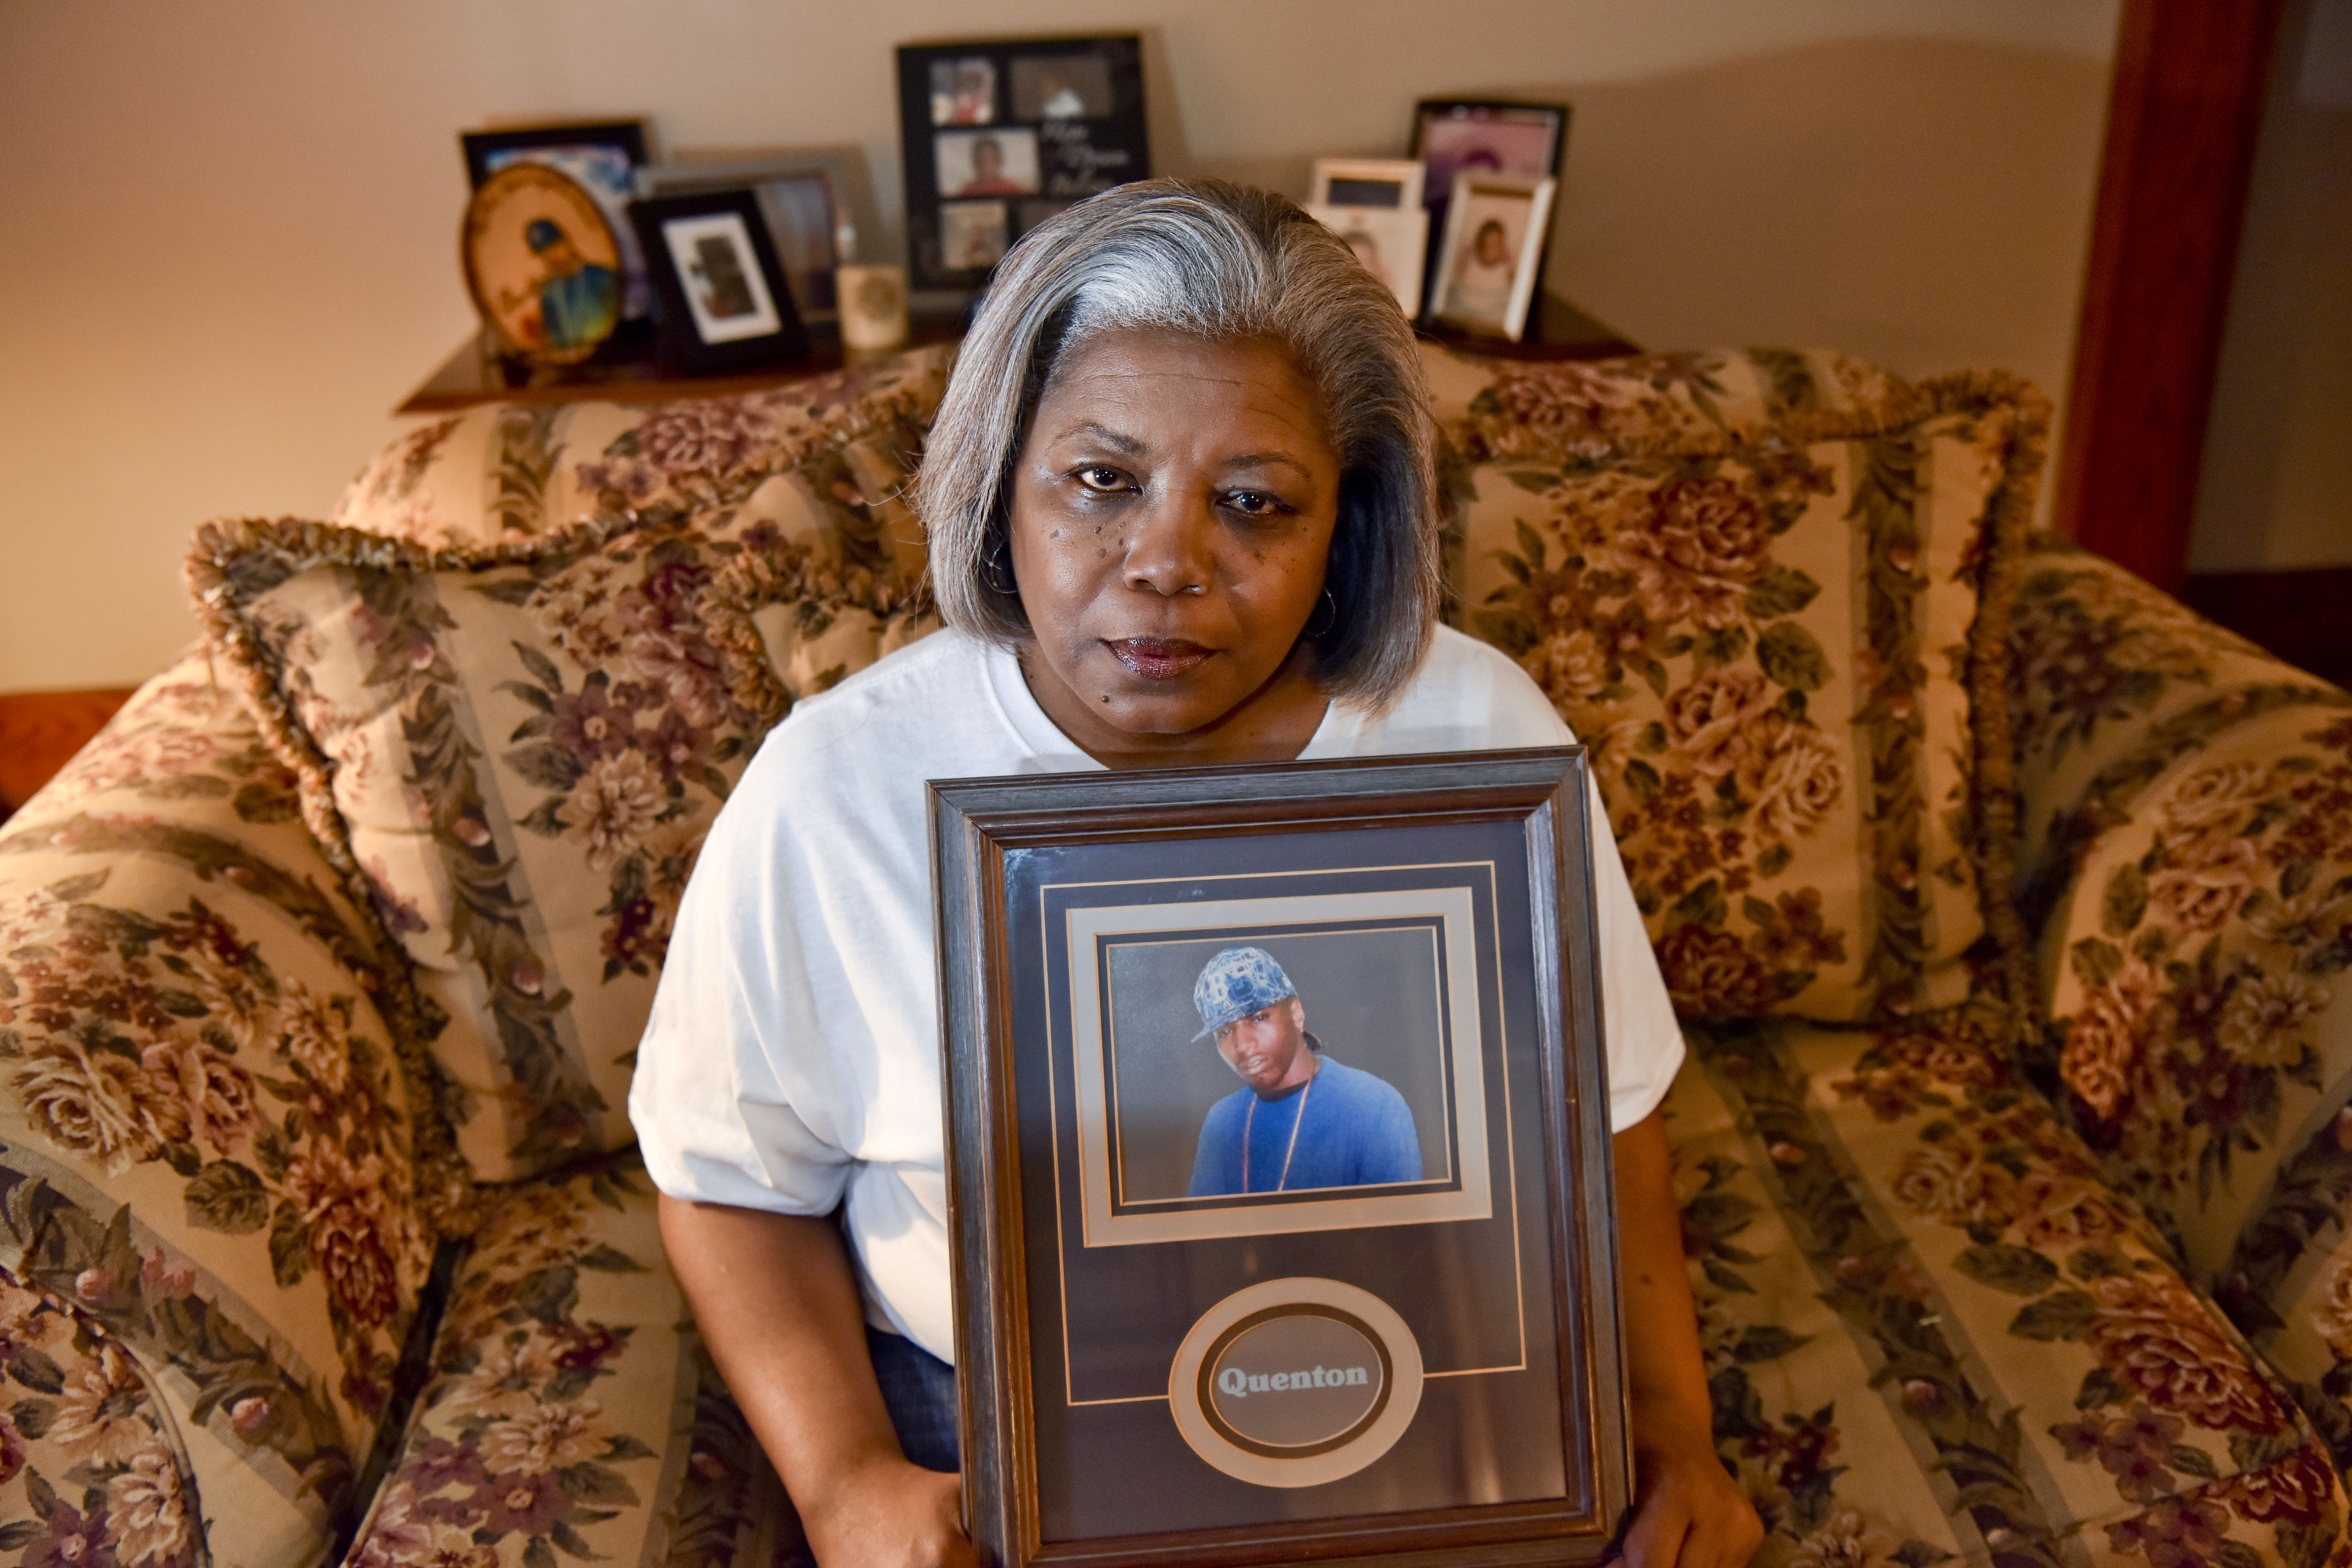 Kim Washington holds a picture of her son Quenton that she often carries with her when she shares her story of losing Quenton to violence. (Frank Couch / The Birmingham Times)